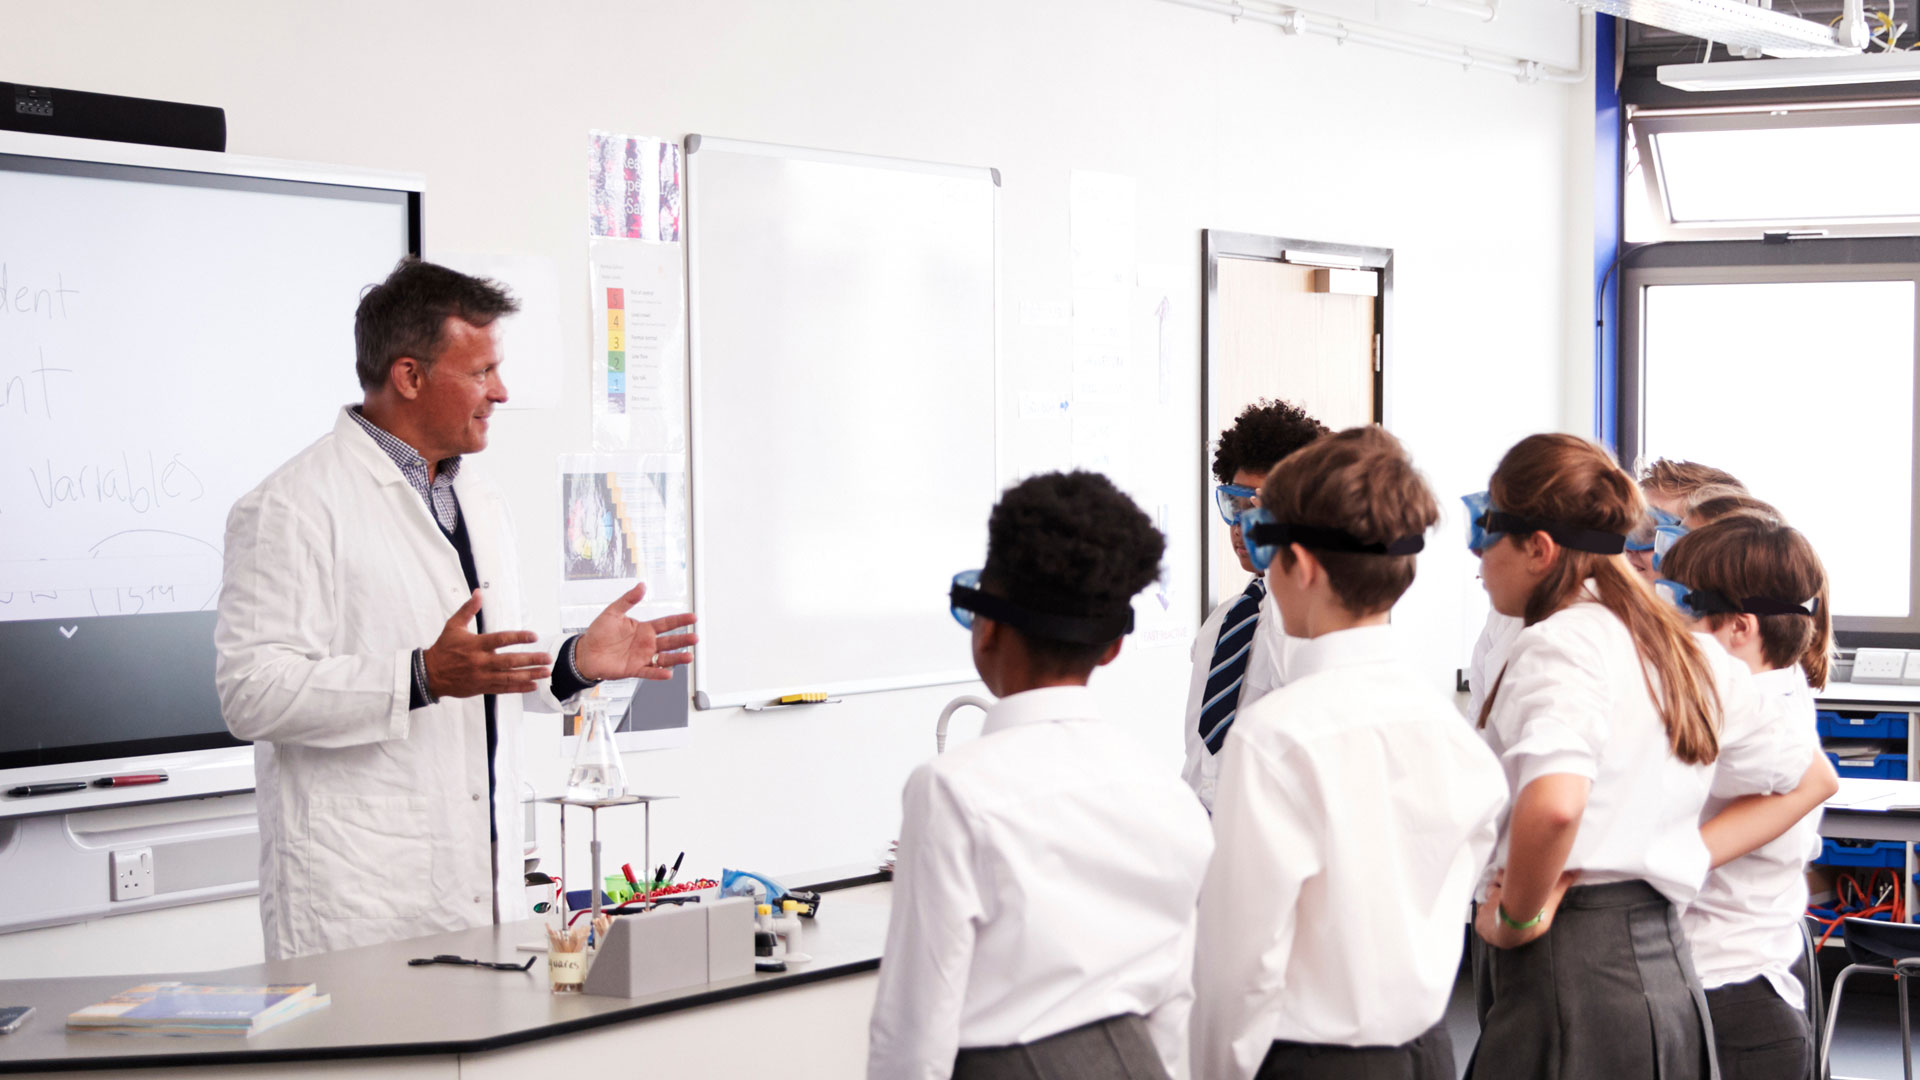 A teacher in a lab coat with a flask on the desk in front of him, talking to a group of students wearing safety glasses.